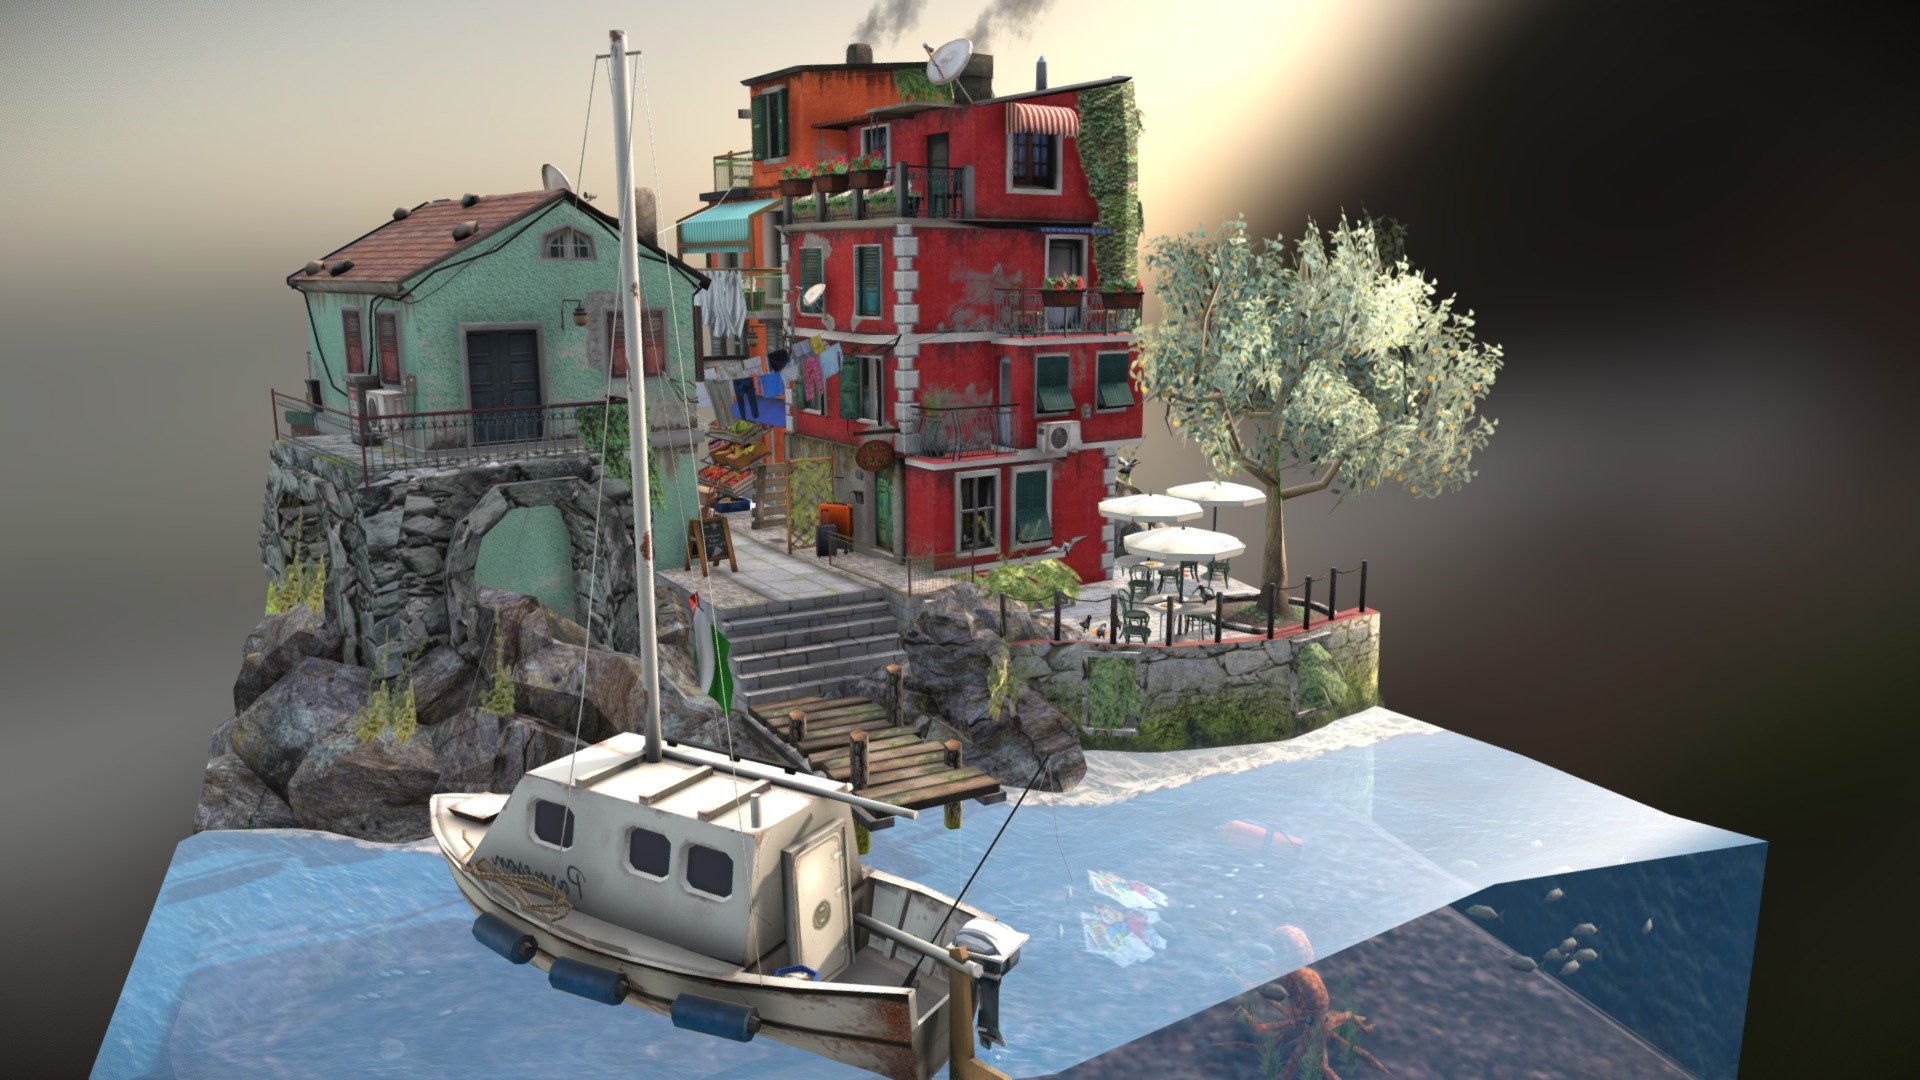 My city scene diorama for 3D Low Poly Class 1DAE01, inspired by Cinque Terre.

(_/)
(-.-)
(&gt; &lt;) - Cinque Terre City Scene - 3D model by Yinuo Chen (@pootine) 3d model